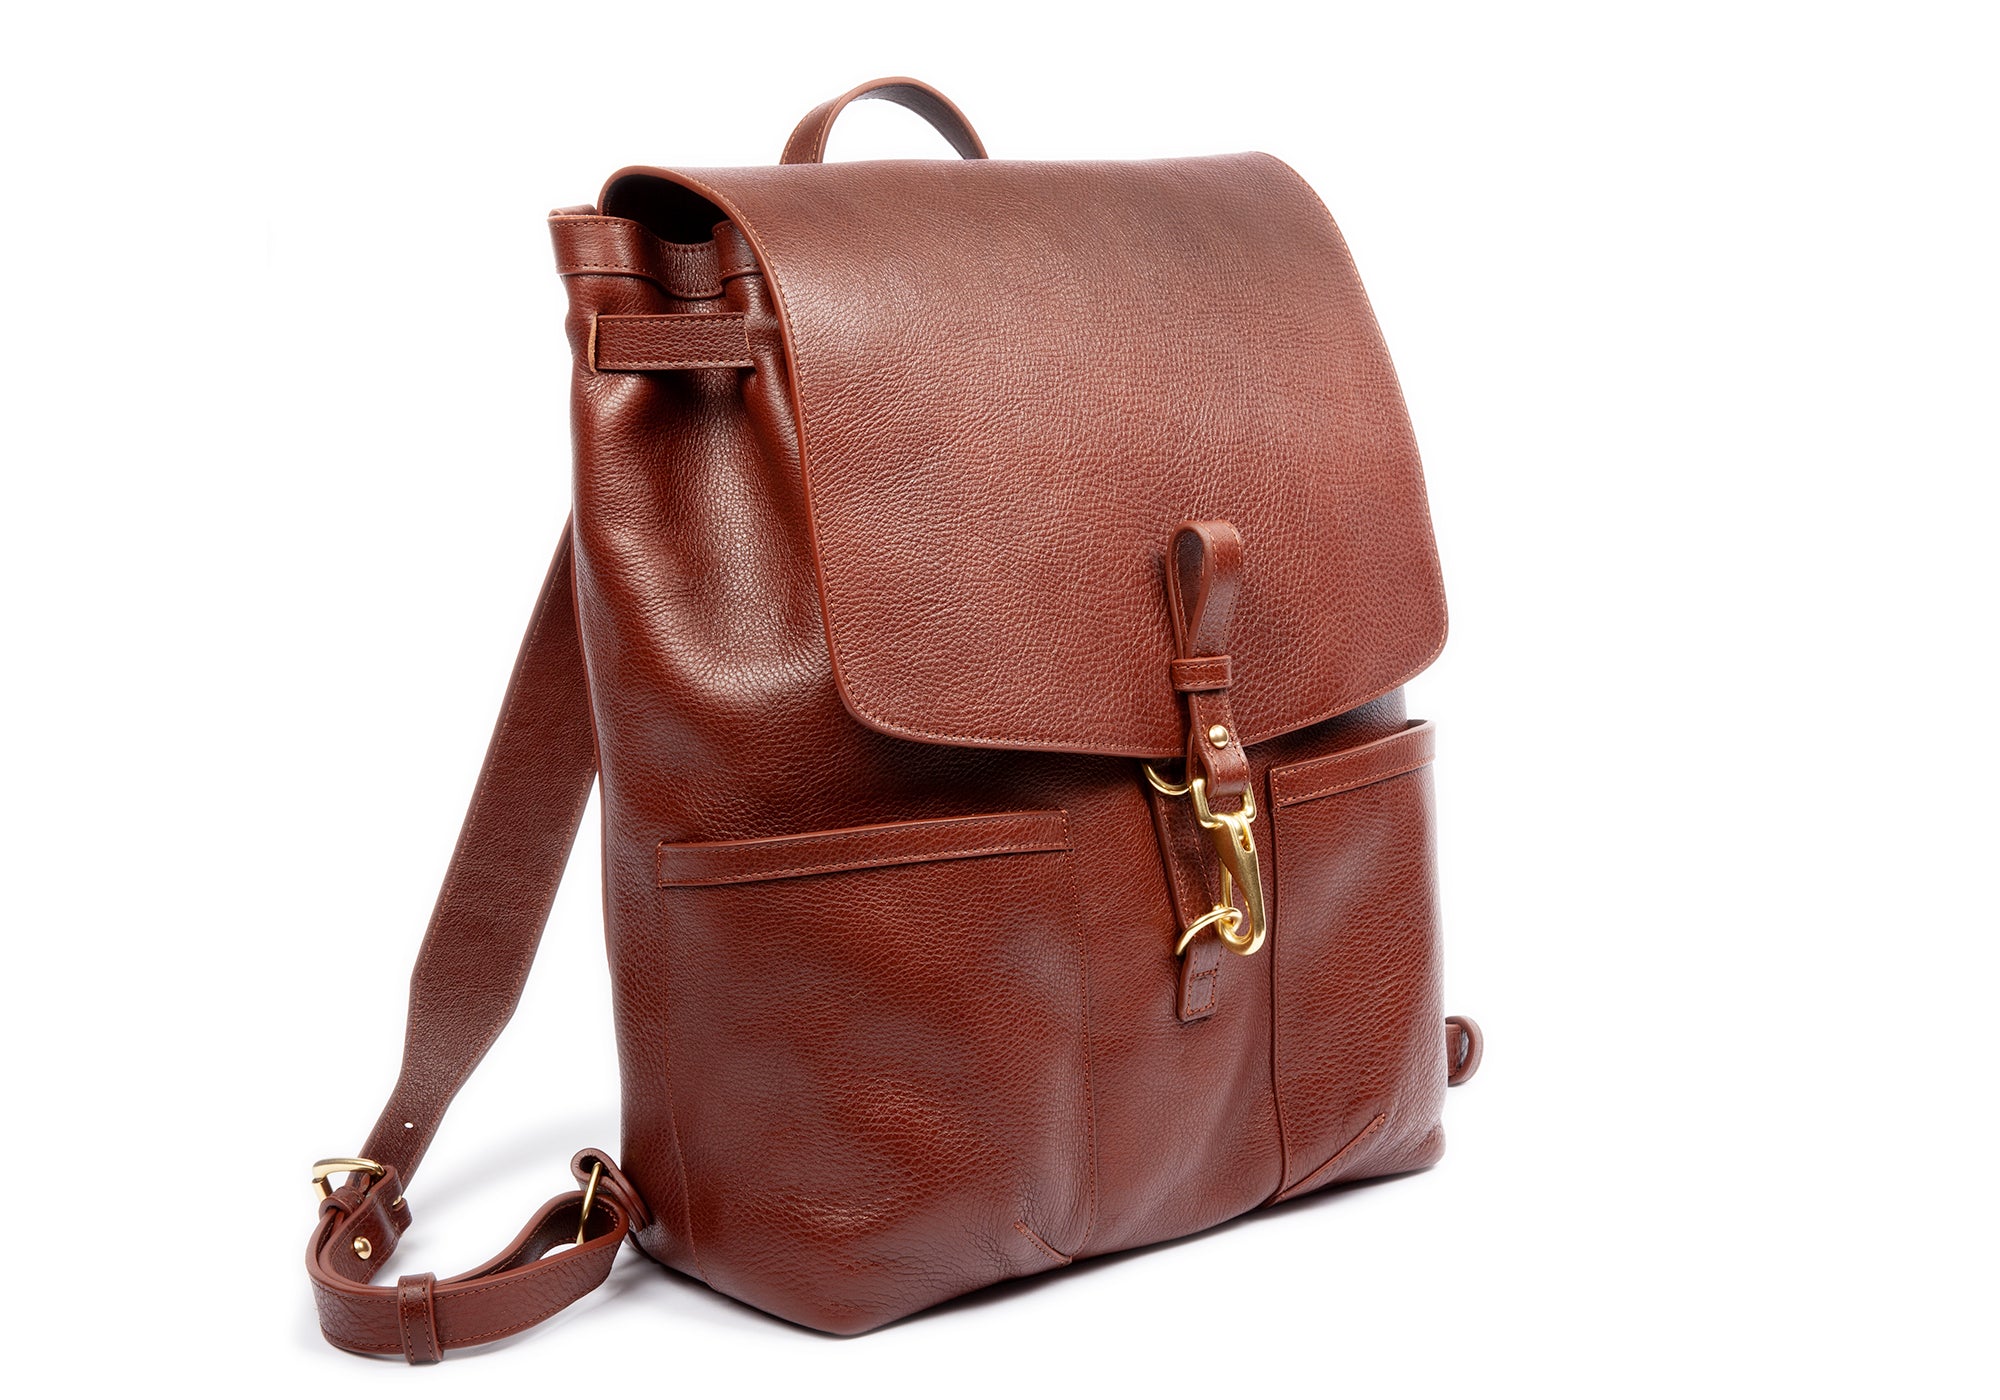 Full Leather Backpack View of Leather Knapsack Chestnut